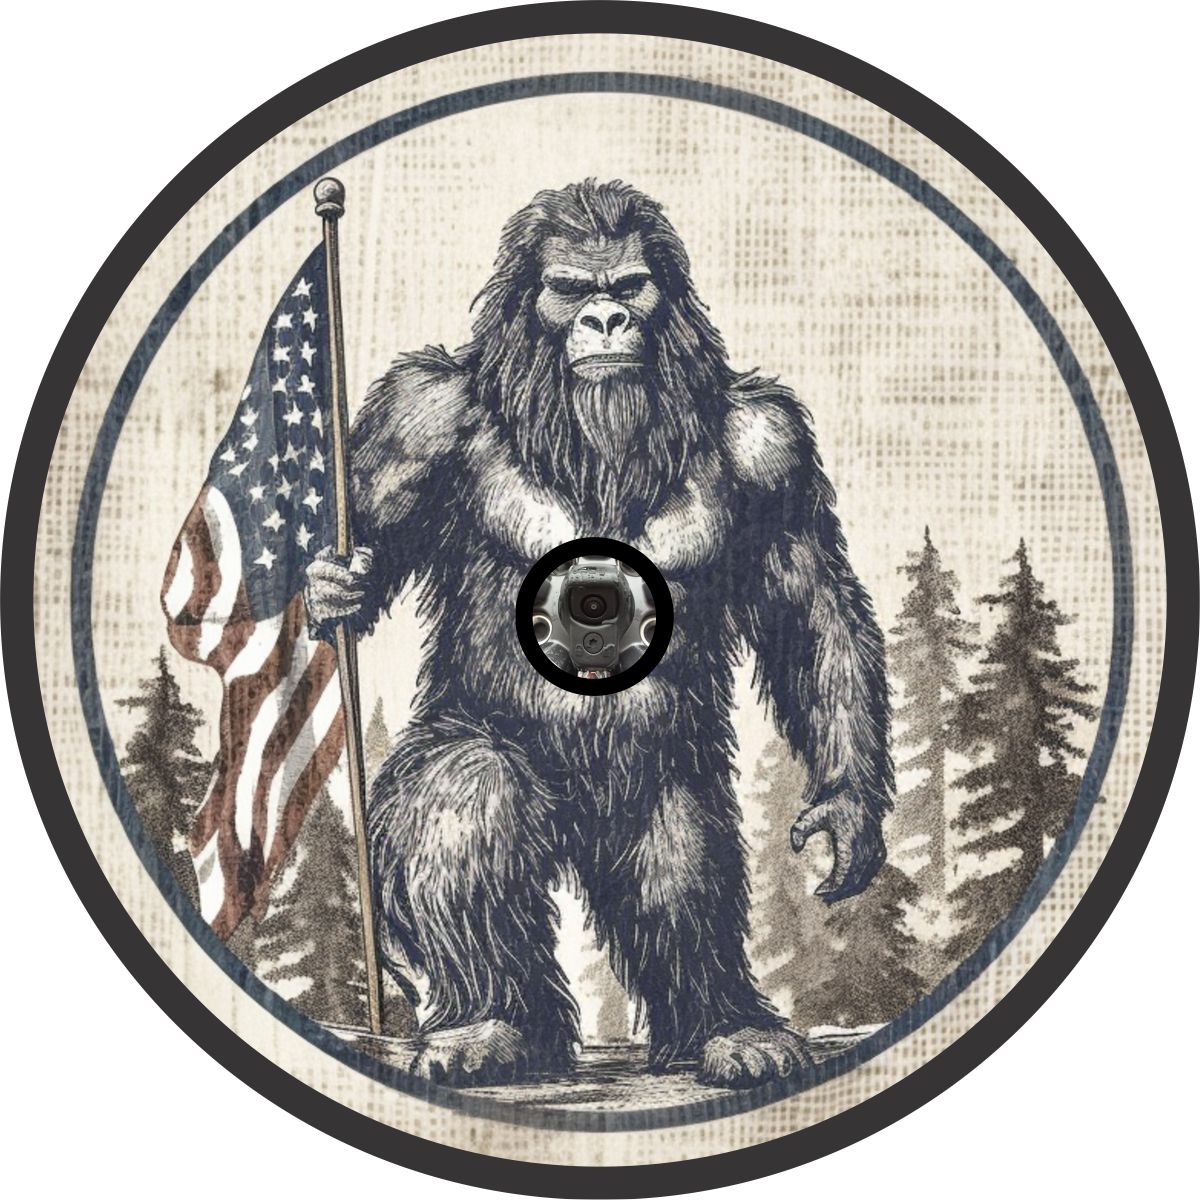 Sasquatch spare tire cover design meant to look like a sketched drawing of bigfoot standing in the forest holding an American flag and the design includes a hole intended for a backup camera.